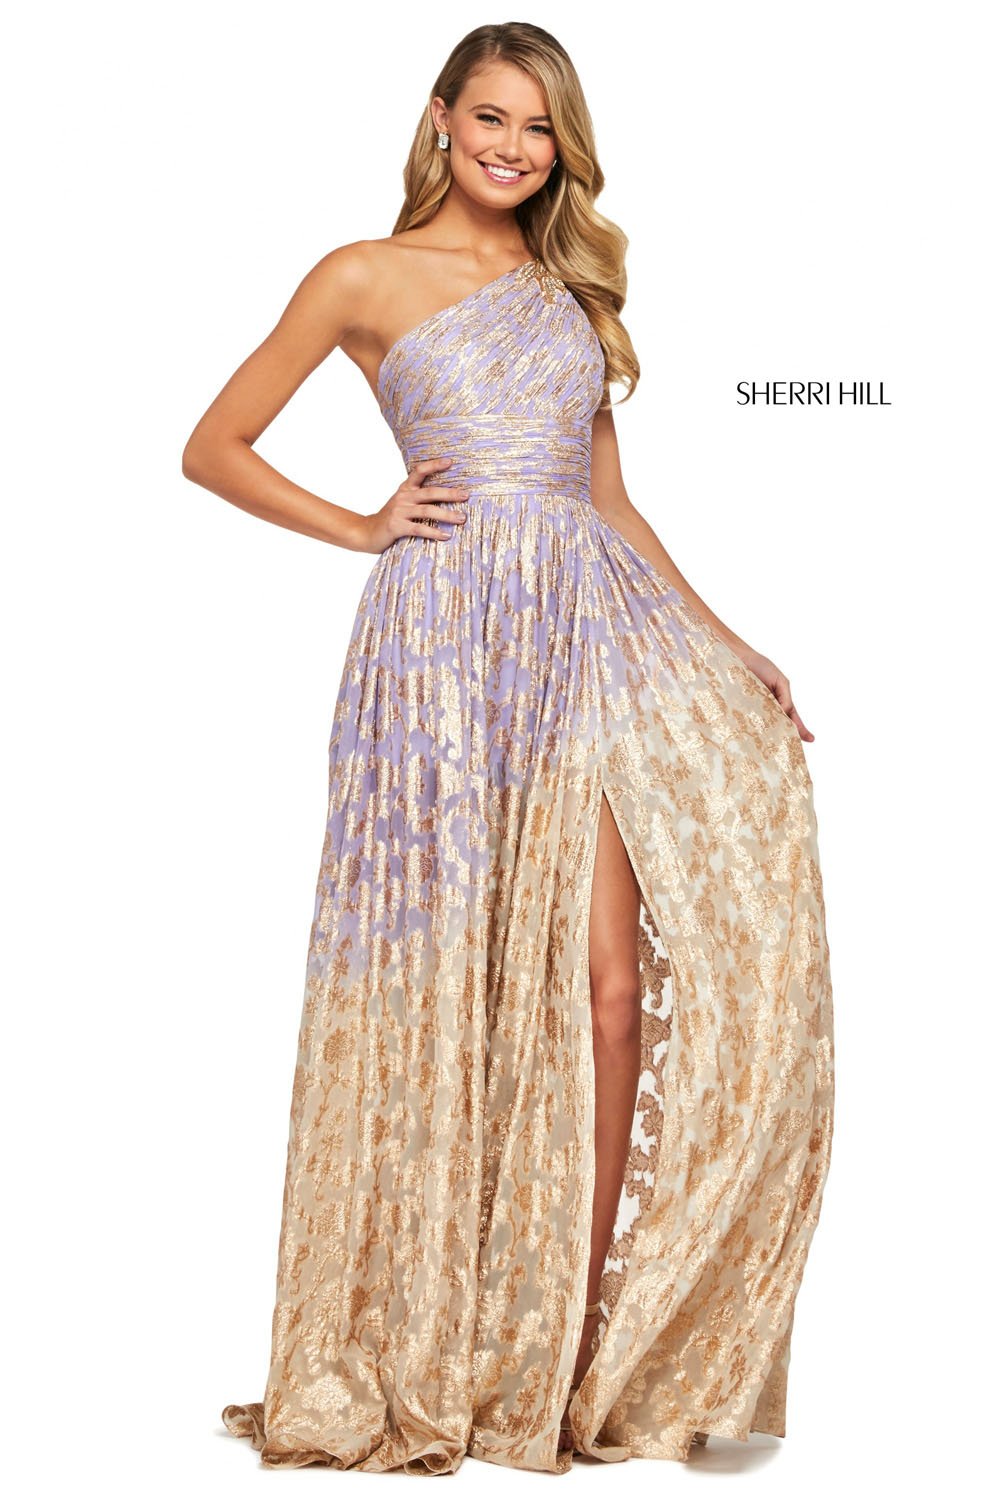 Sherri Hill 53376 dress images in these colors: Nude Aqua, Periwinkle Coral, Lilac Gold, Light Blue Pink, Coral Pink.